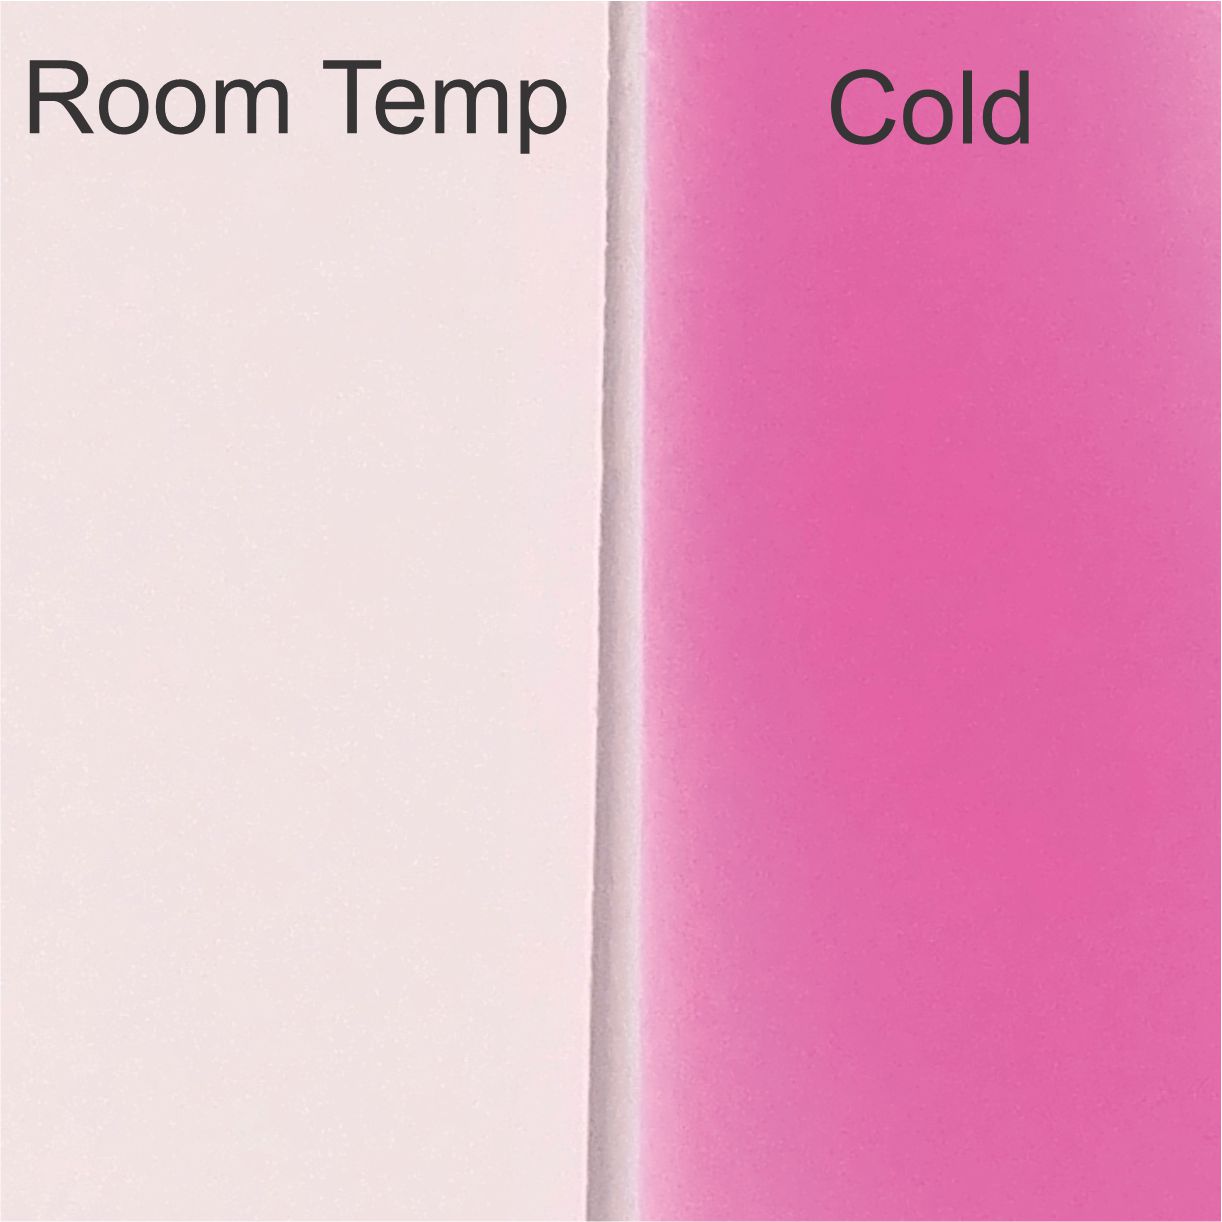 Color Changing Cold Pink Adhesive Vinyl Choose Your Length CLEARANCE